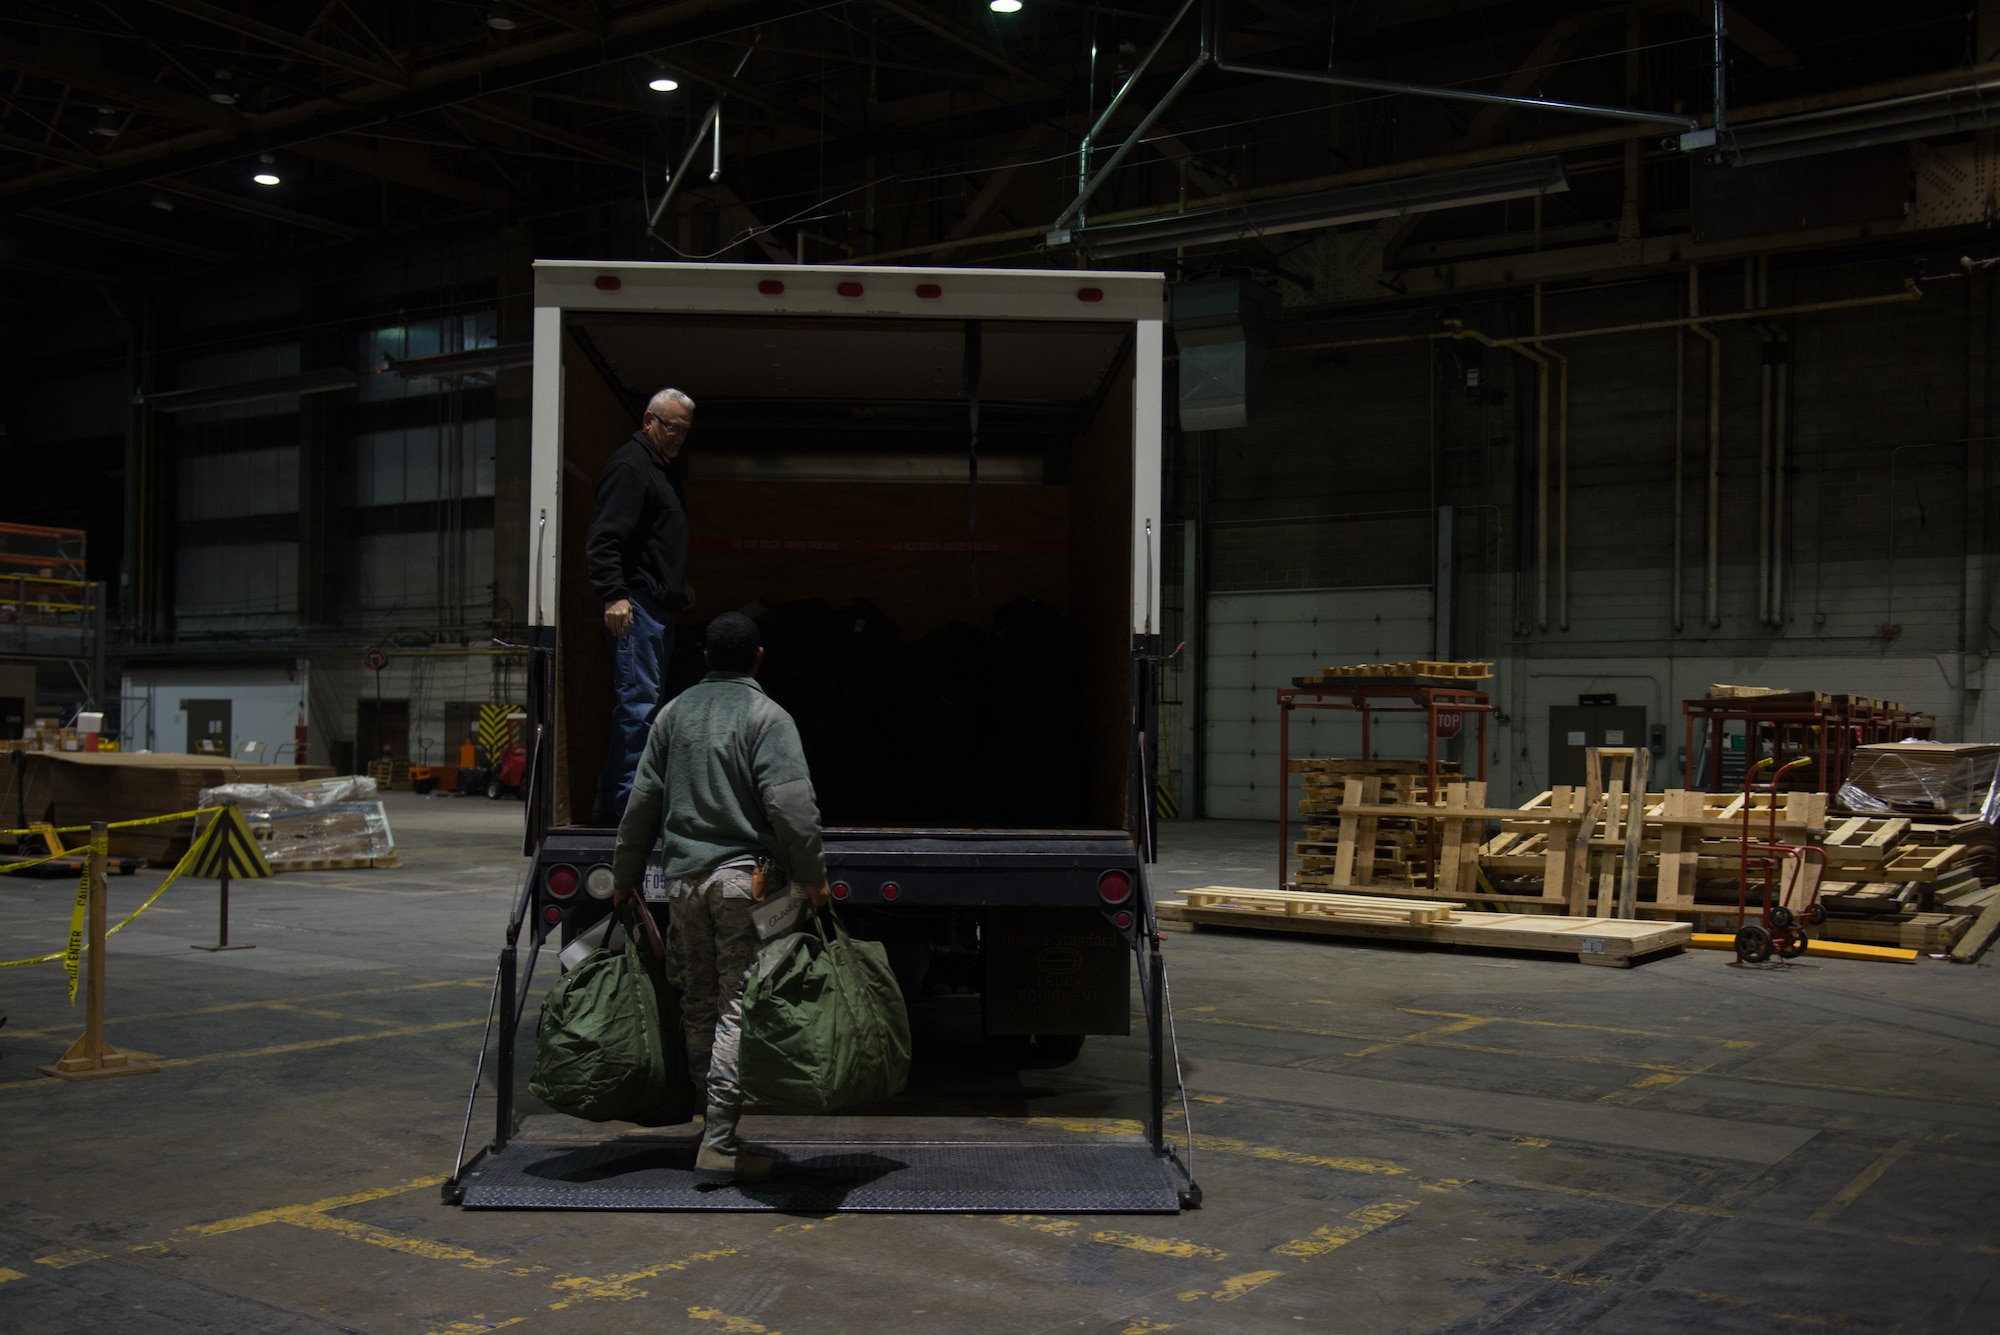 Senior Airman Christopher Orange, 55th Communications Squadron, loads his mobility bags onto a cargo truck Jan. 29, 2019, on Offutt Air Force Base, Nebraska. Orange was taking in part in Phase I of Operational Readiness Exercise Winter Havoc. (U.S. Air Force photo by Tech. Sgt. Rachelle Blake)